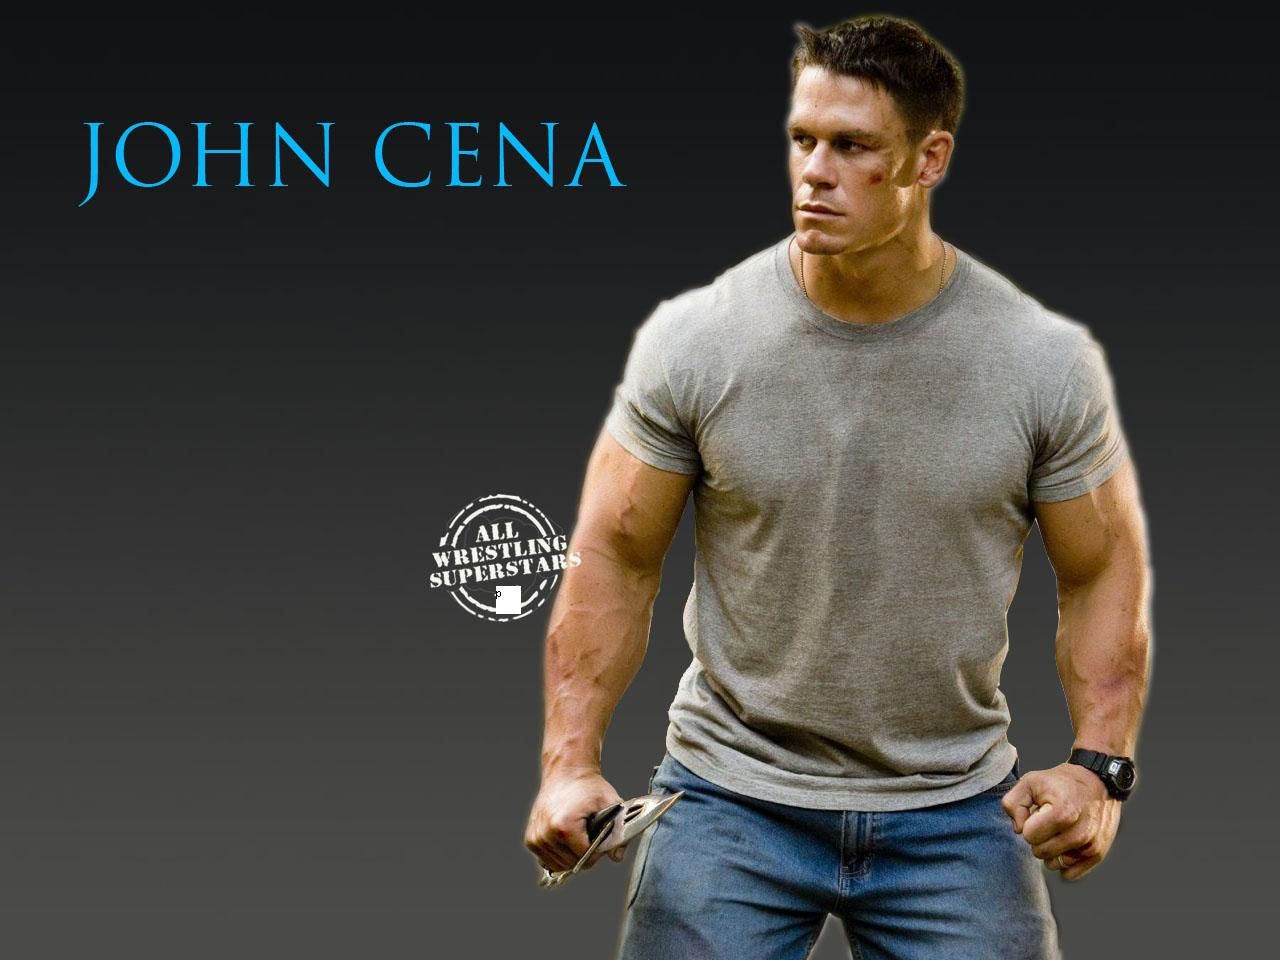 Football News, Picture, Match Highlights, Celebrity Picture: John Cena Stylish HD Wallpaper For Desktop